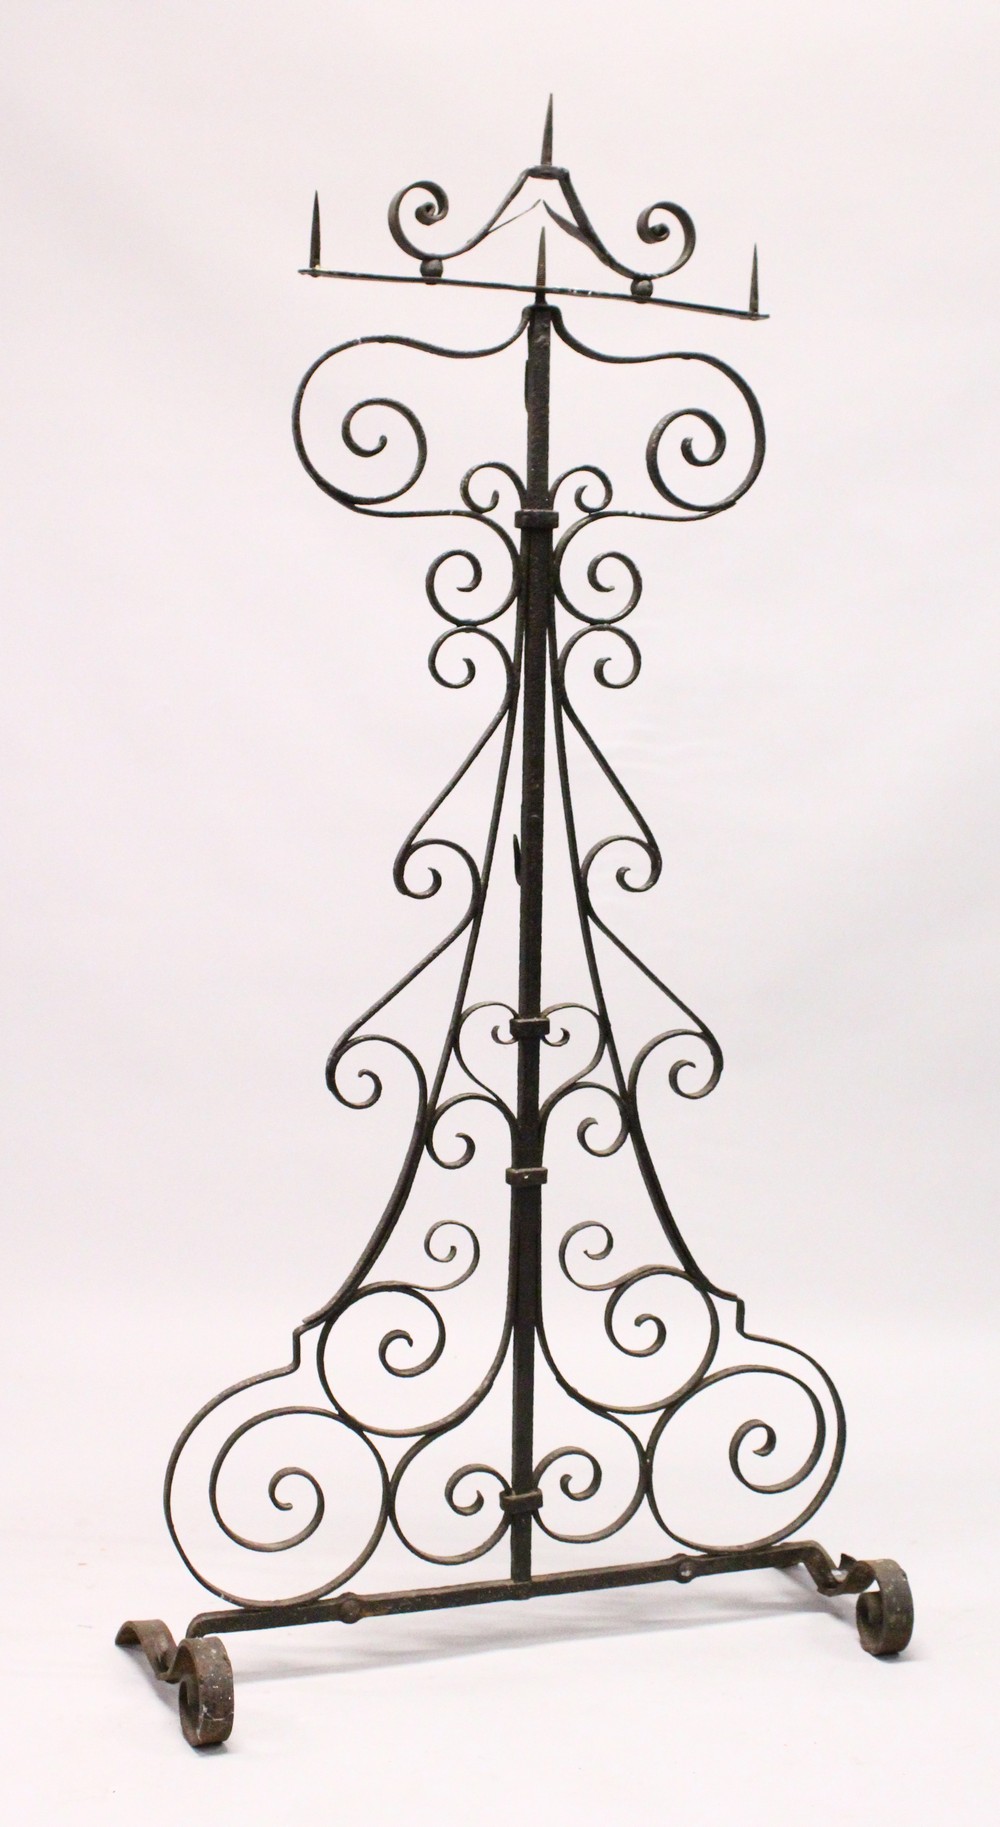 A GOOD 17TH CENTURY WROUGHT IRON FLOOR STANDING CANDELABRA, with a revolving top, ornate support